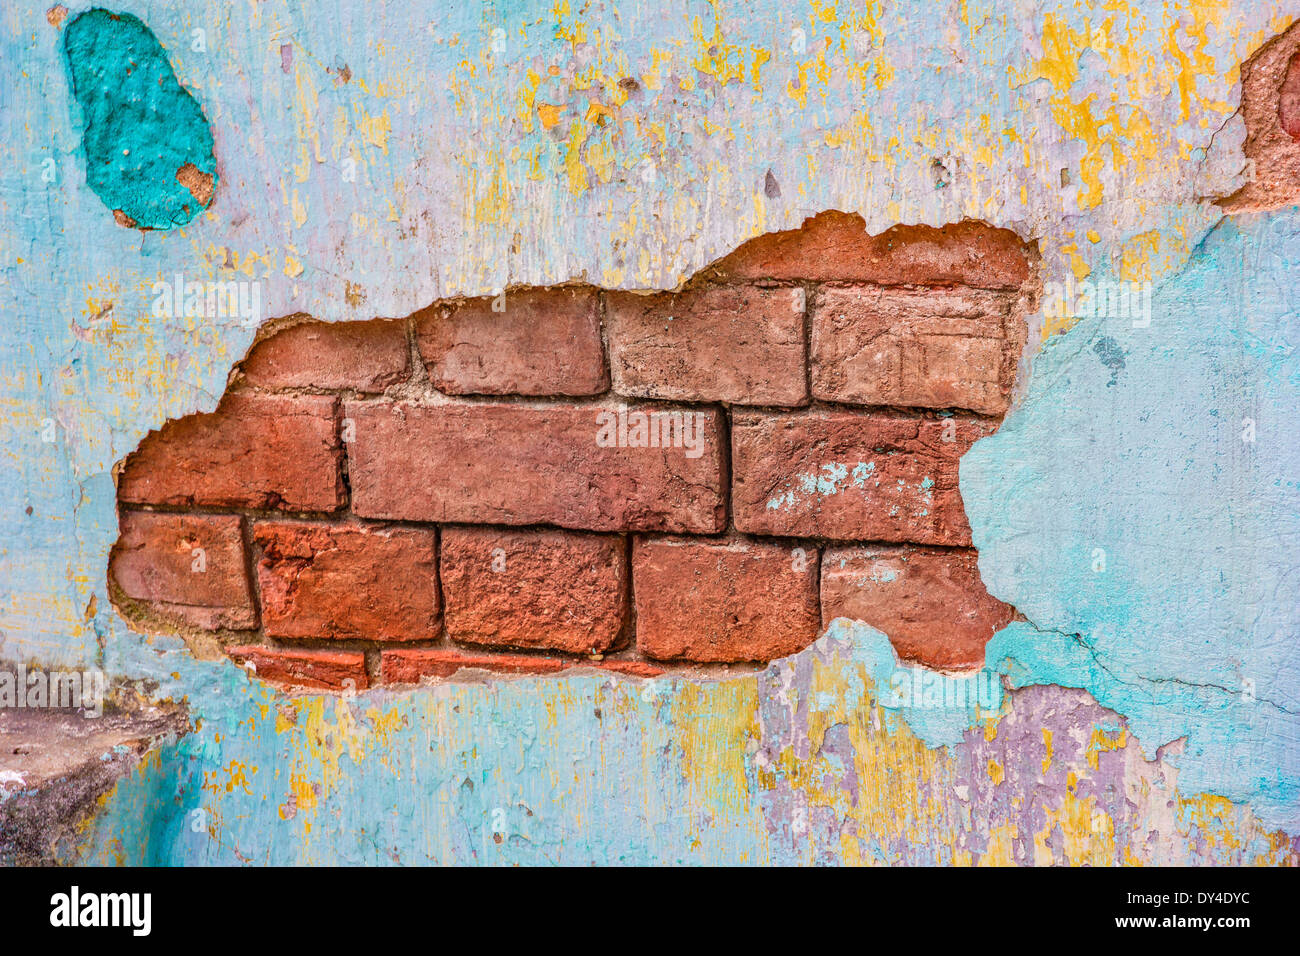 Colorfully painted plaster chipping off a brick wall Stock Photo